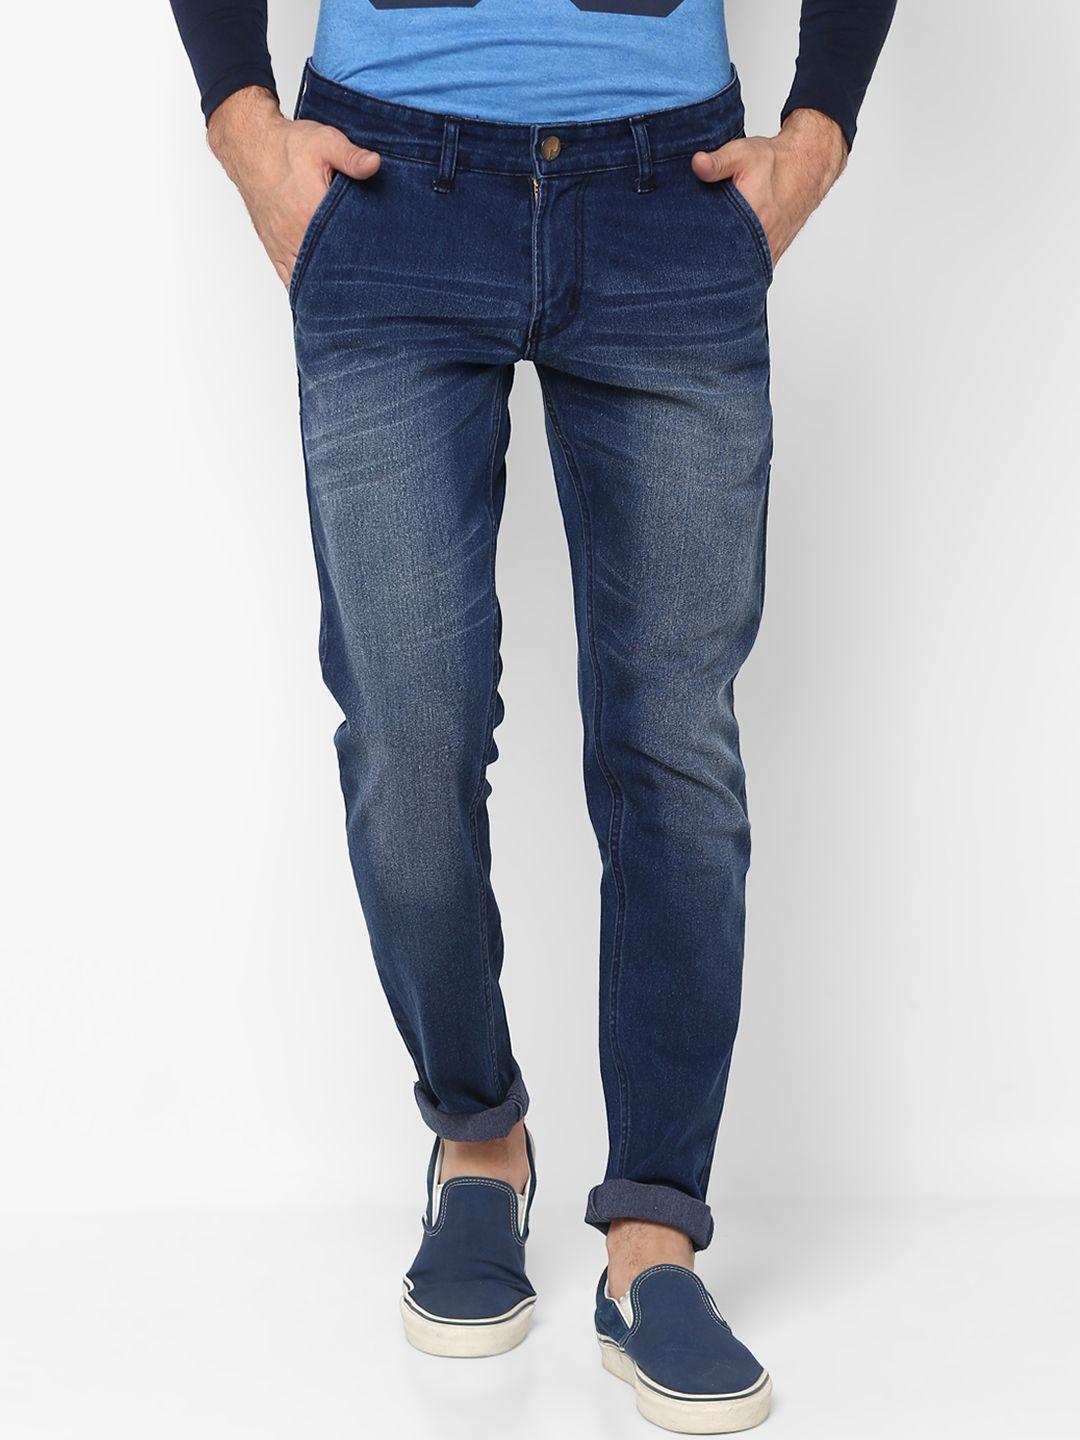 urbano-fashion-men-blue-slim-fit-mid-rise-clean-look-stretchable-jeans